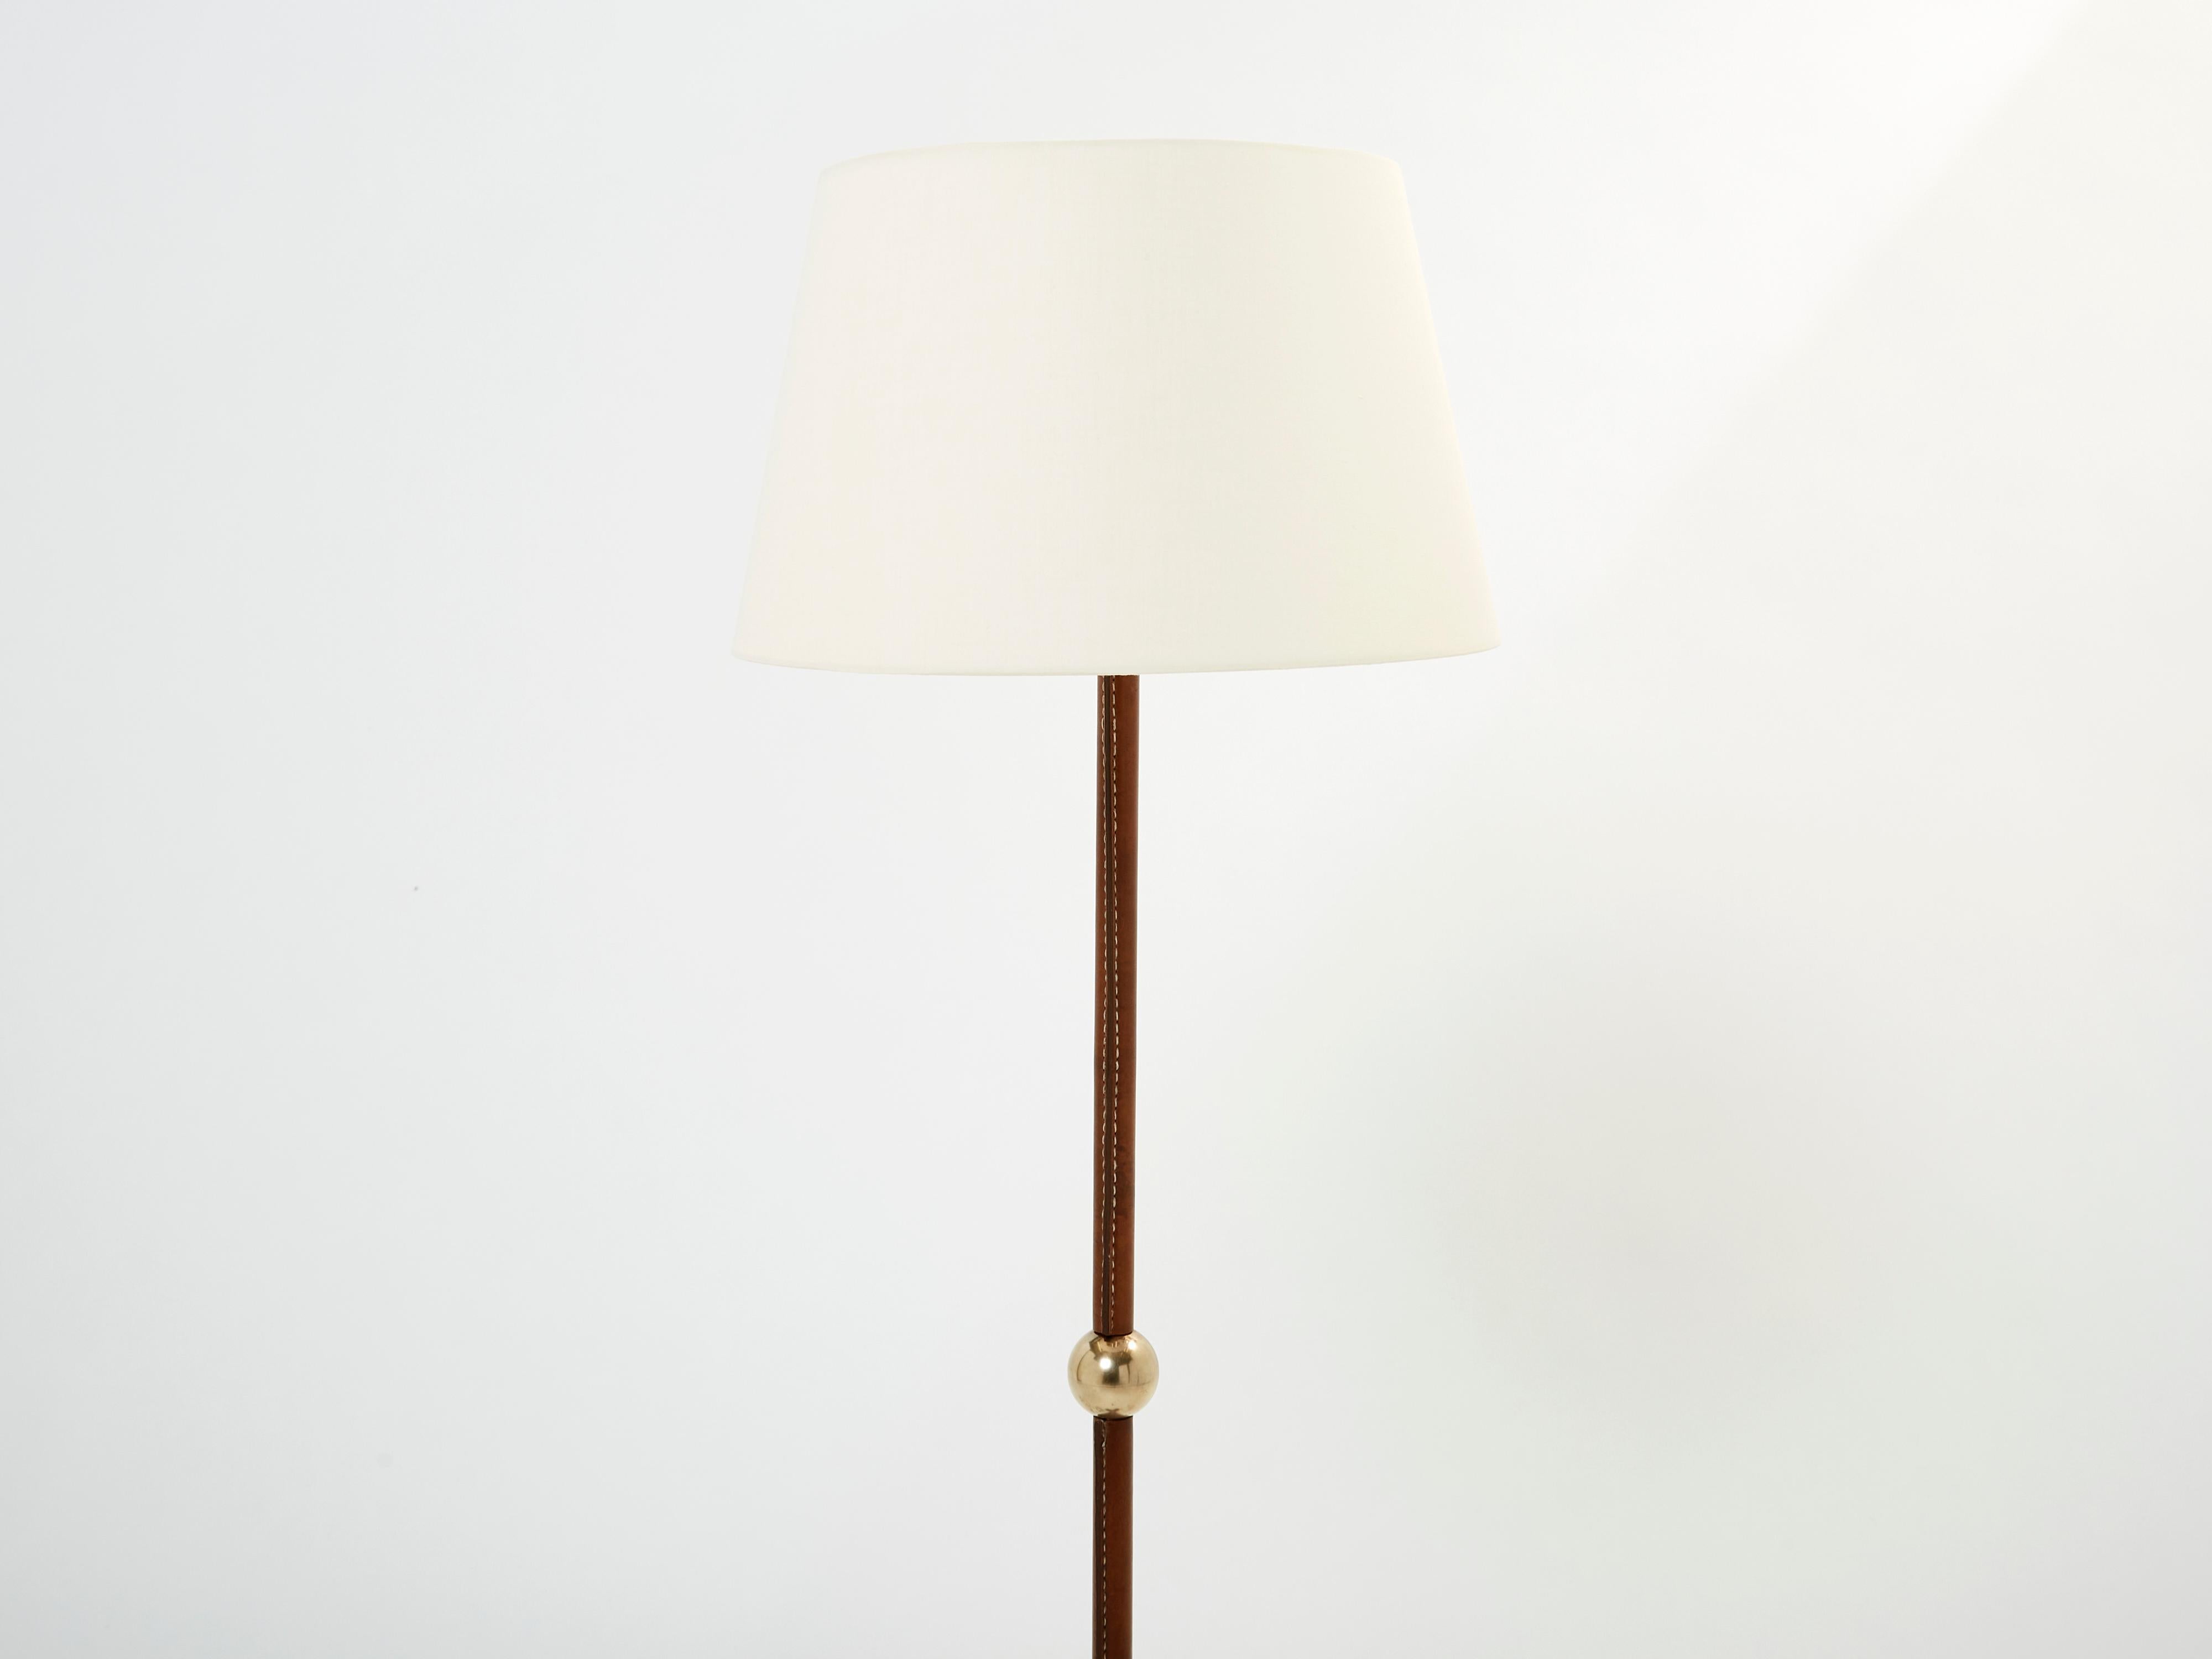 This elegant Jacques Adnet floor lamp is sure to add an element of French modernisme to any room in your home. It was designed and produced by Jacques Adnet in the 1950s. With piqué sellier stitched brown leather structure, with brass accents, brass